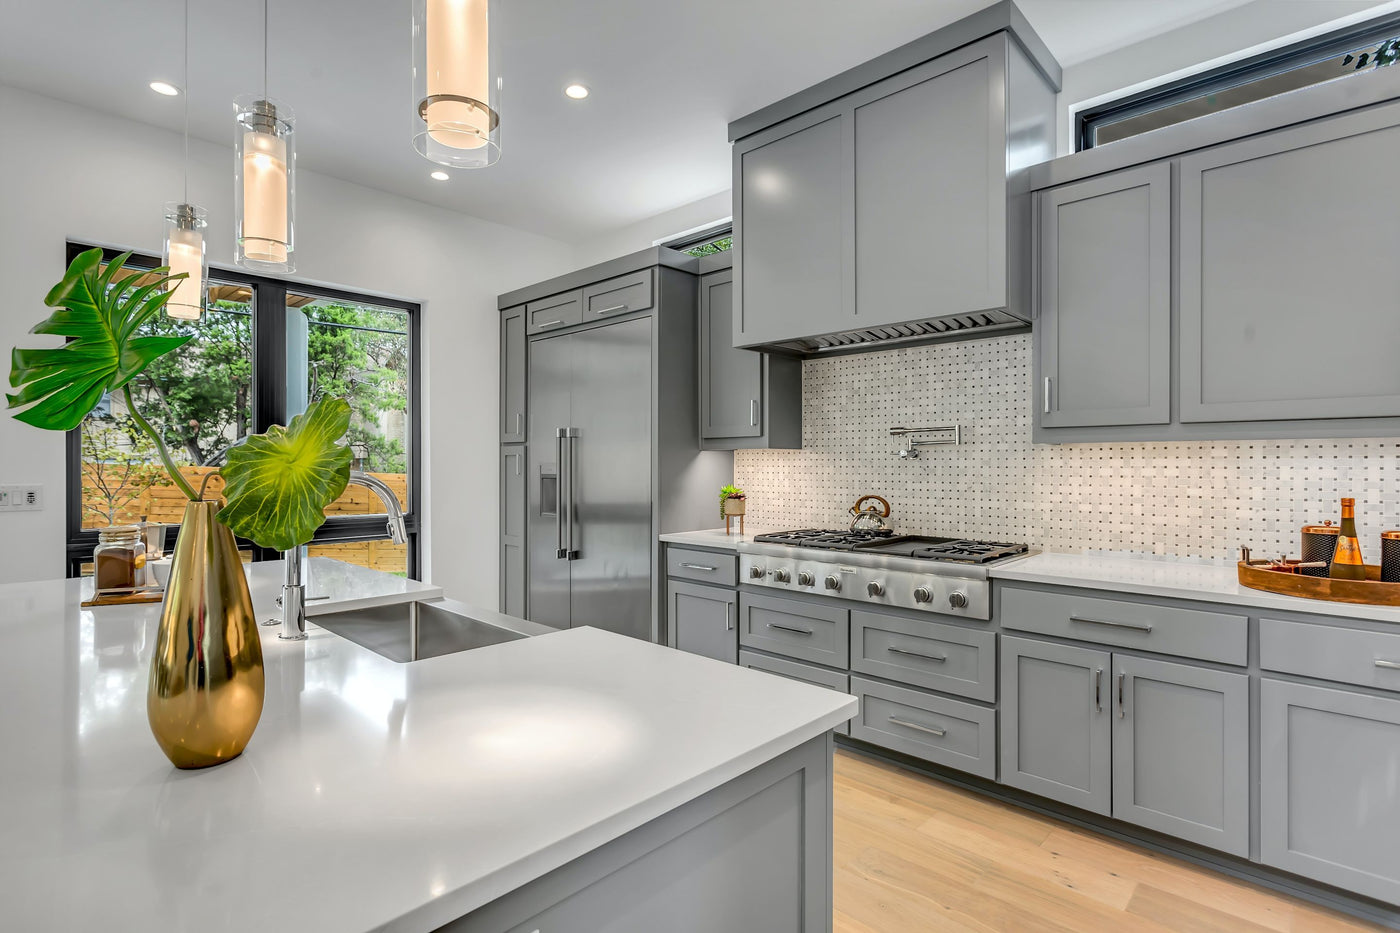 3 Steps To Choosing The Right Kitchen Cabinets